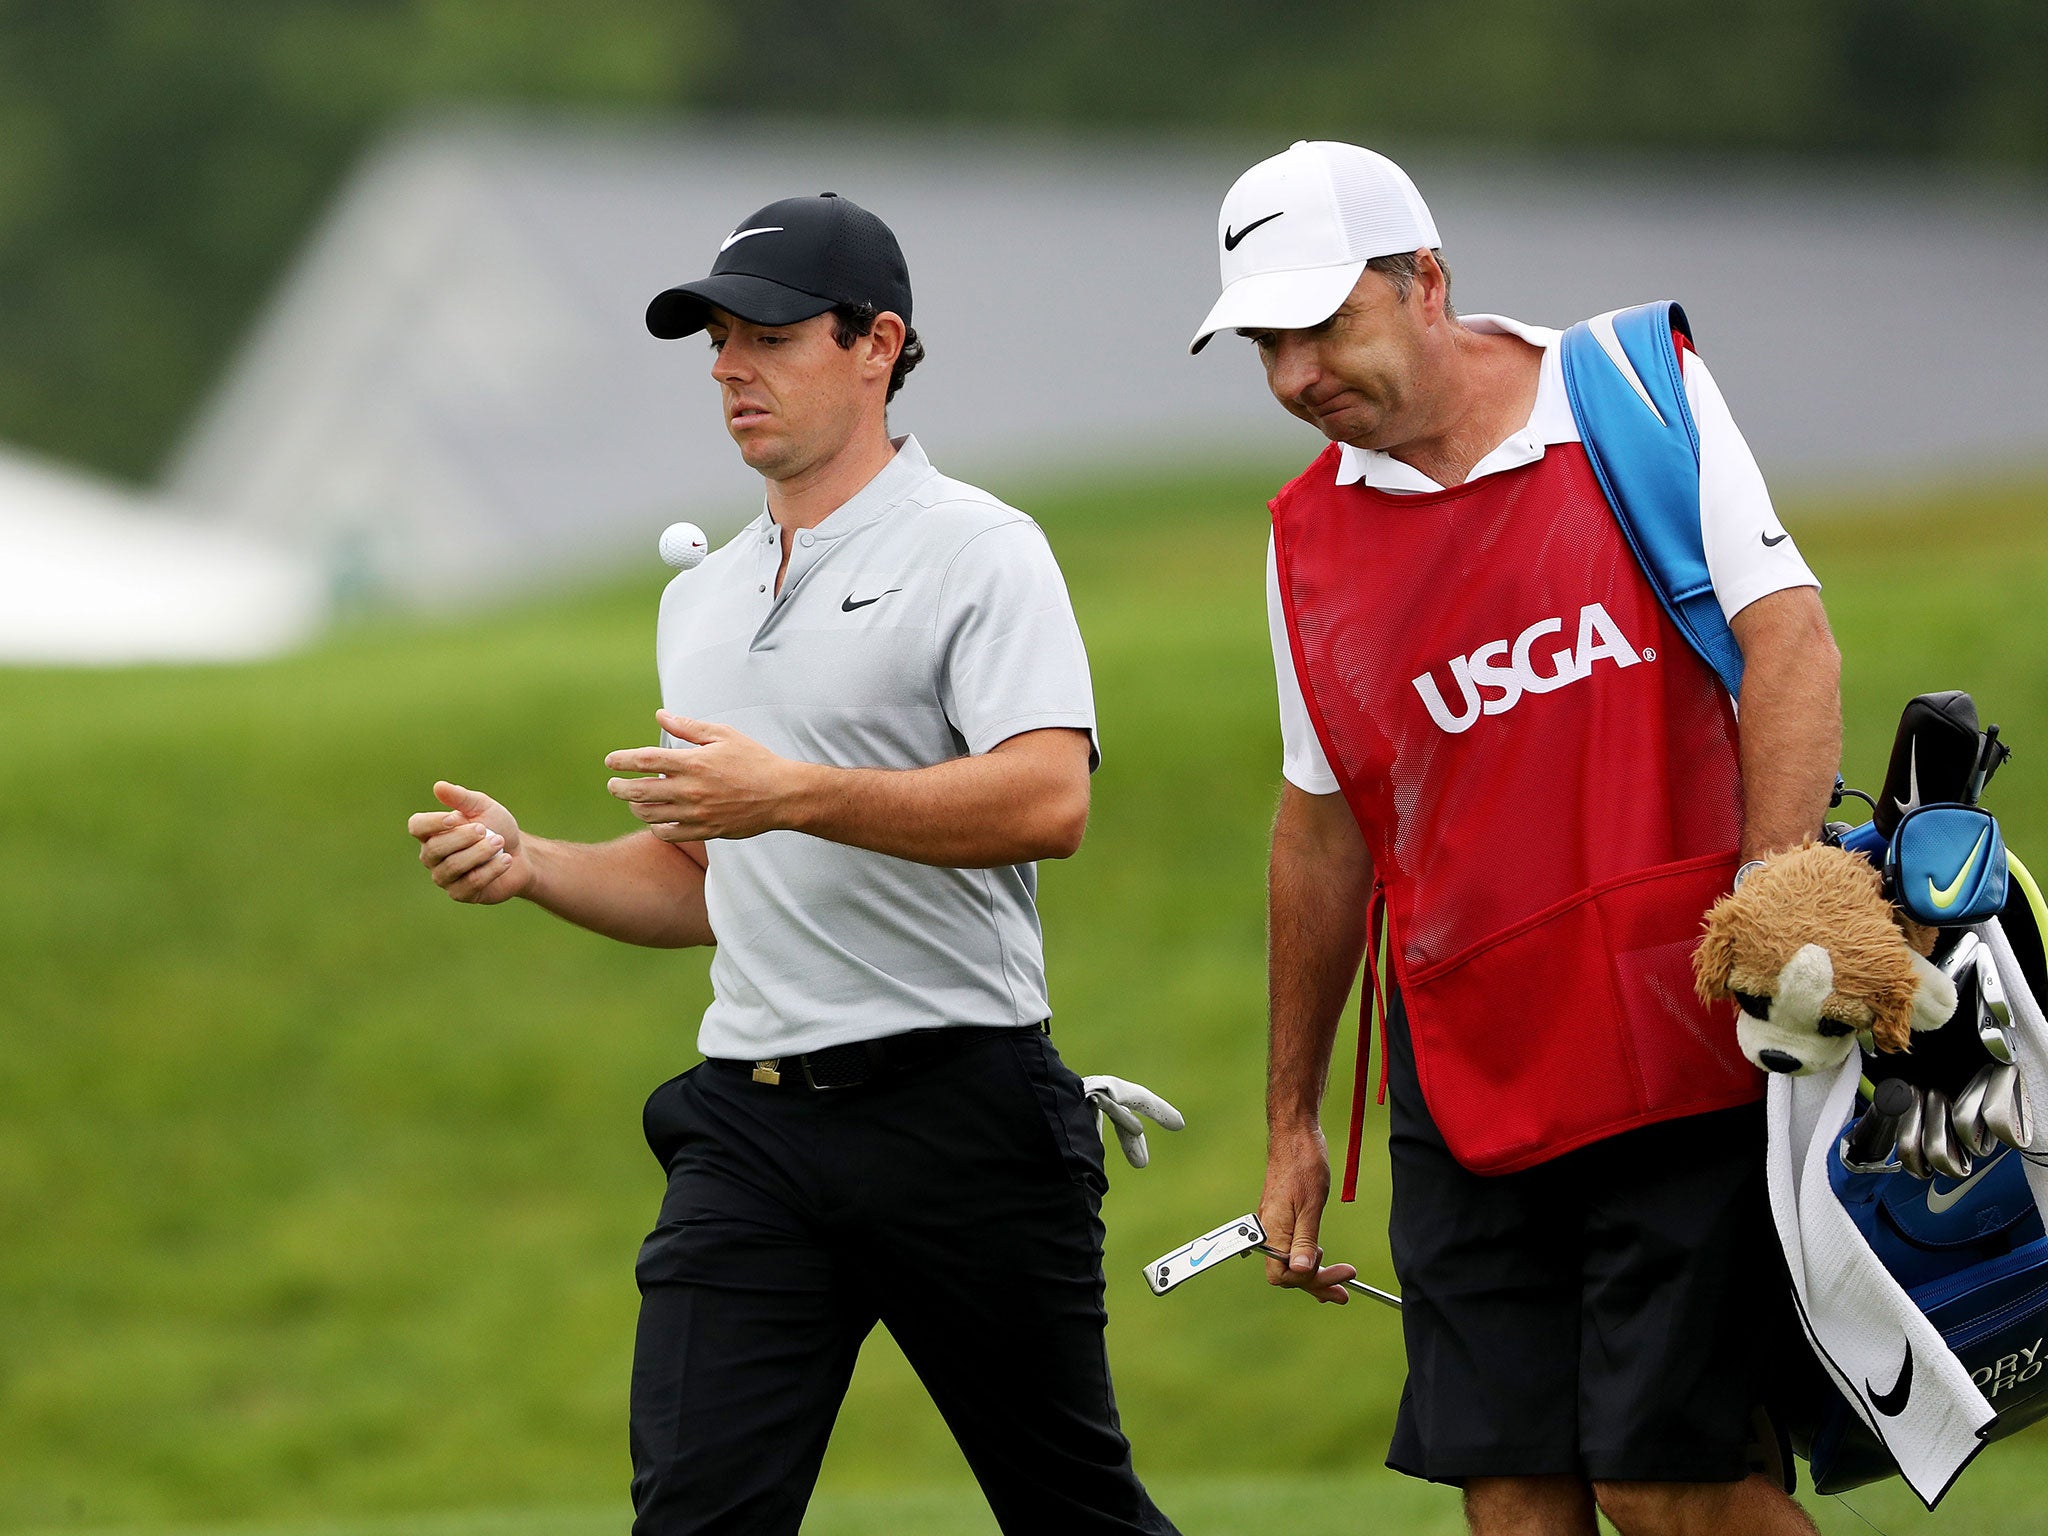 Rory McIlroy on day one of the US Open